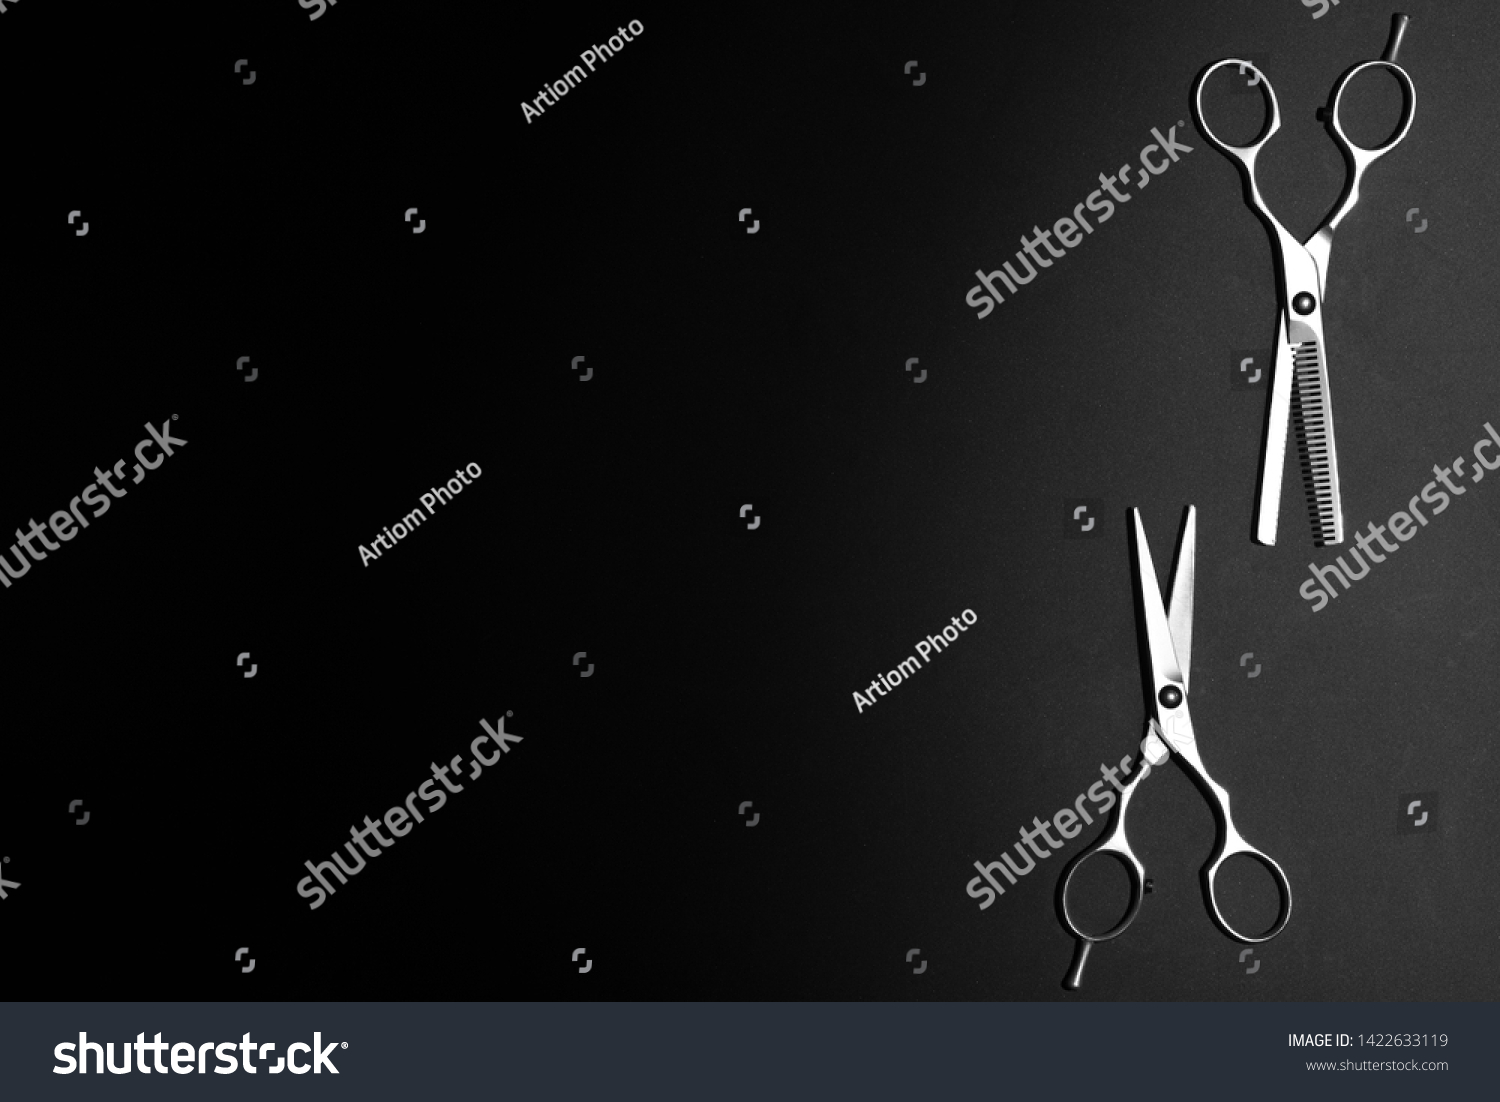 scissors for haircut, texturizing or thinning hair cutting shears, professional salon equipment on black background. Flat lay mockup #1422633119